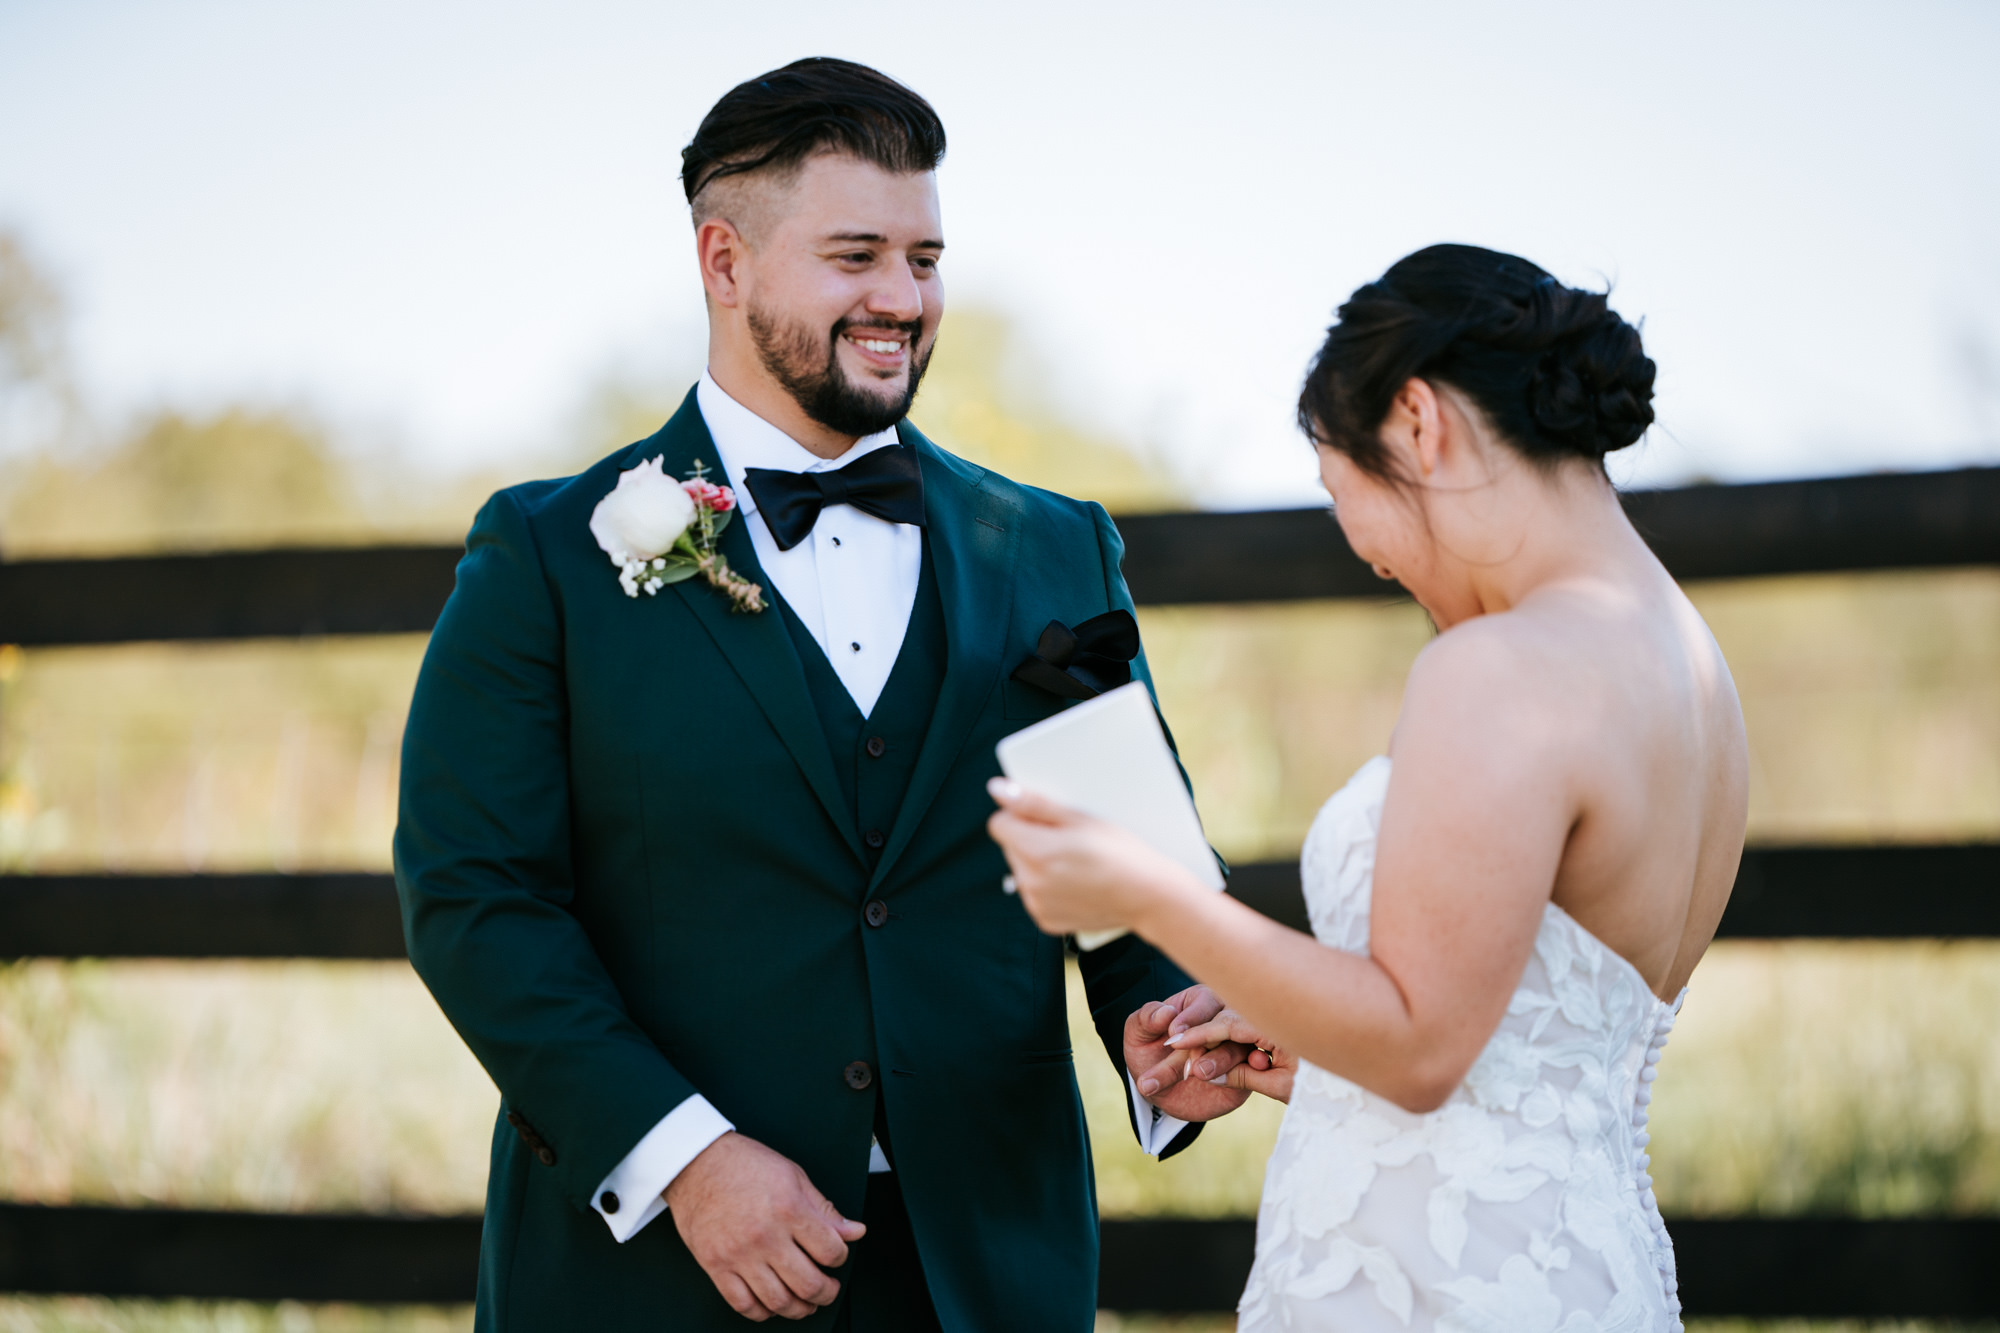 groom seeing bride for the first time on their wedding day